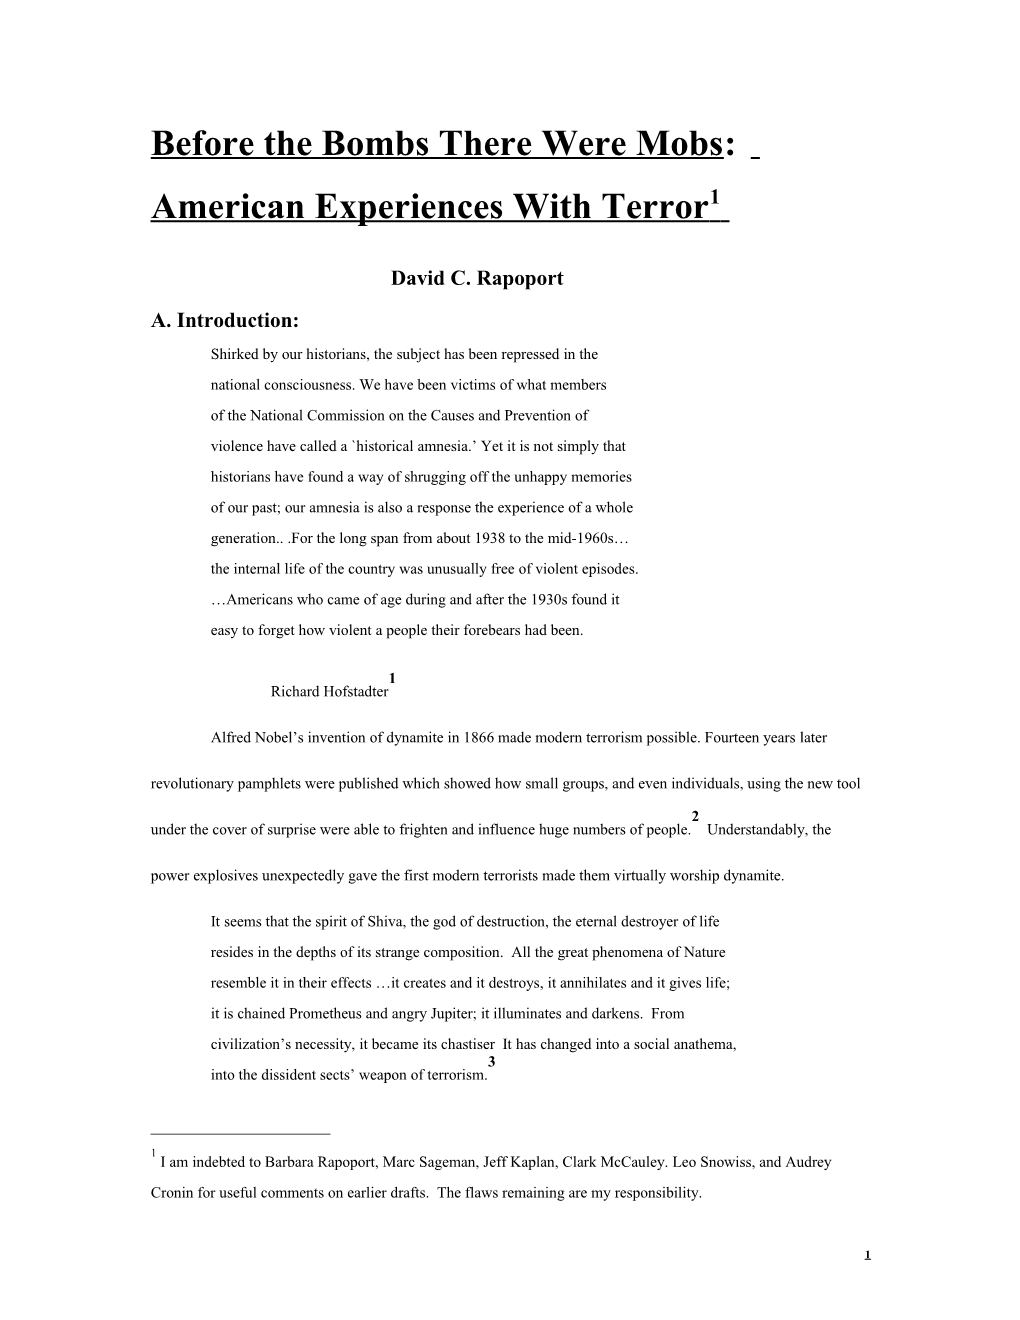 Before the Bombs There Were Mobs: American Experiences with Terror 1